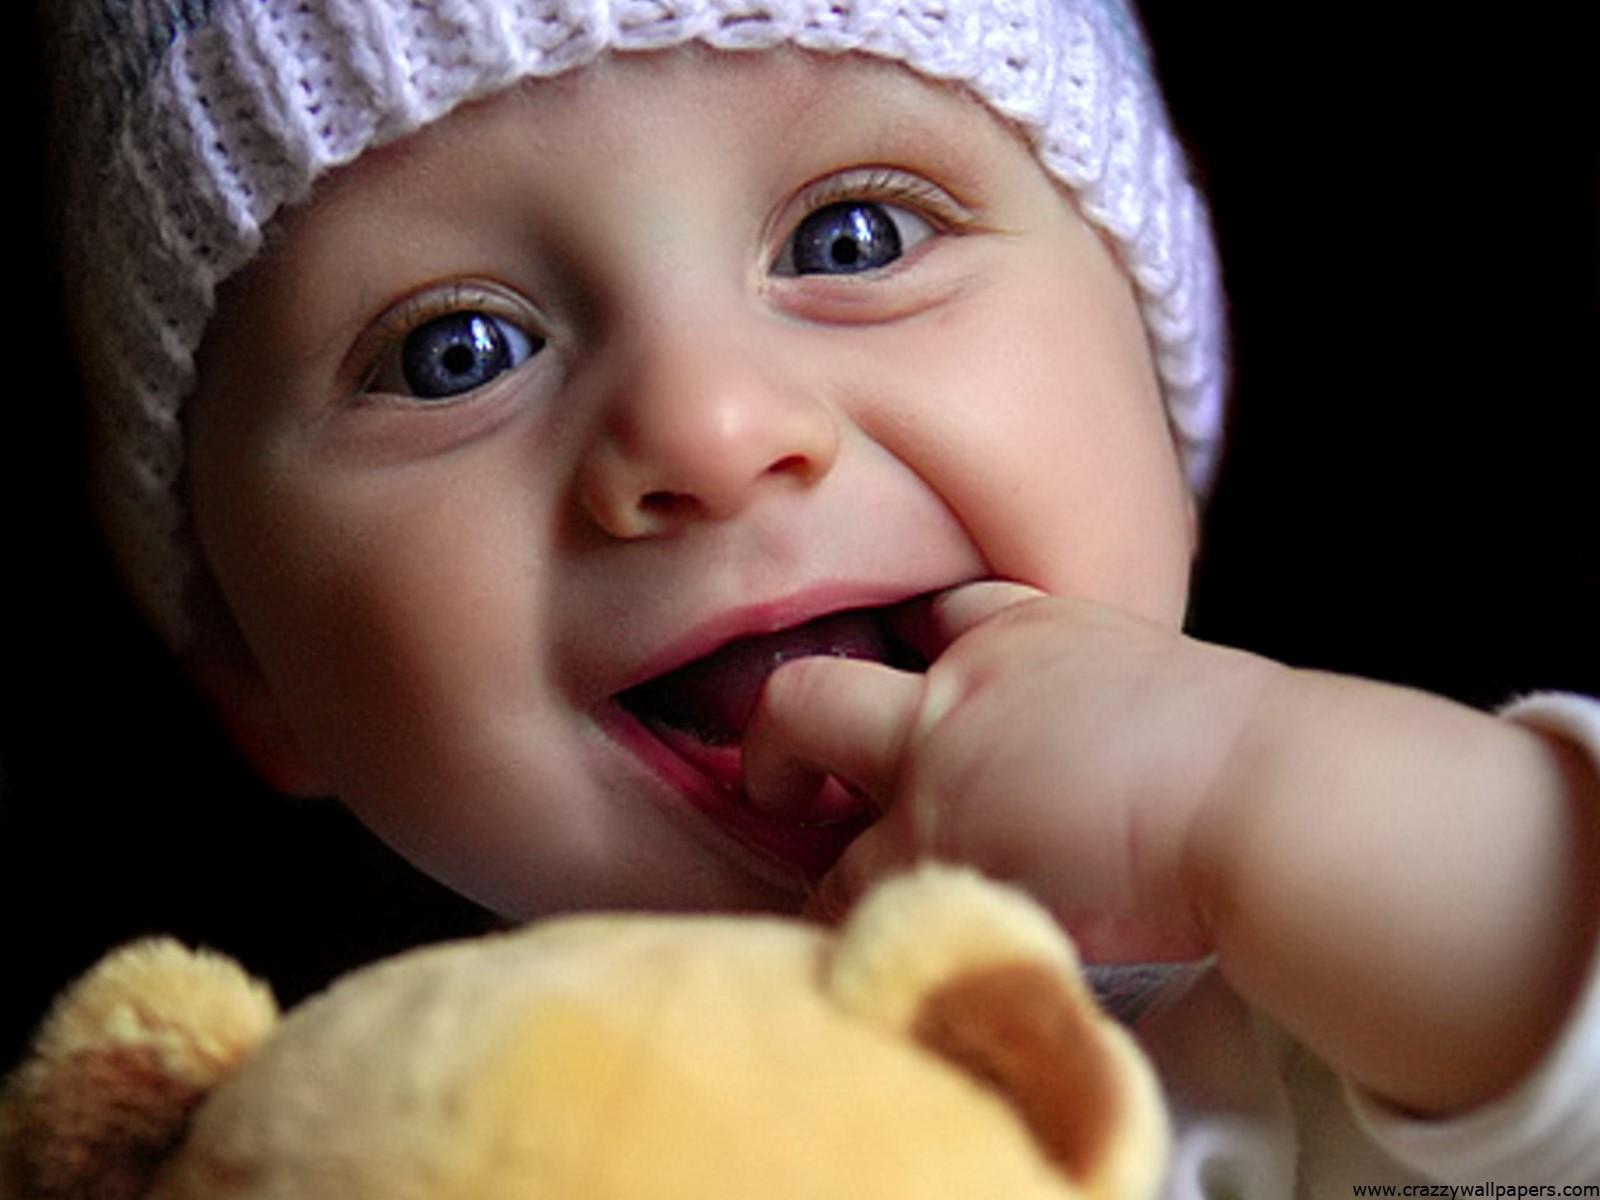 Cute Baby Child Playing with Doll Wallpaper